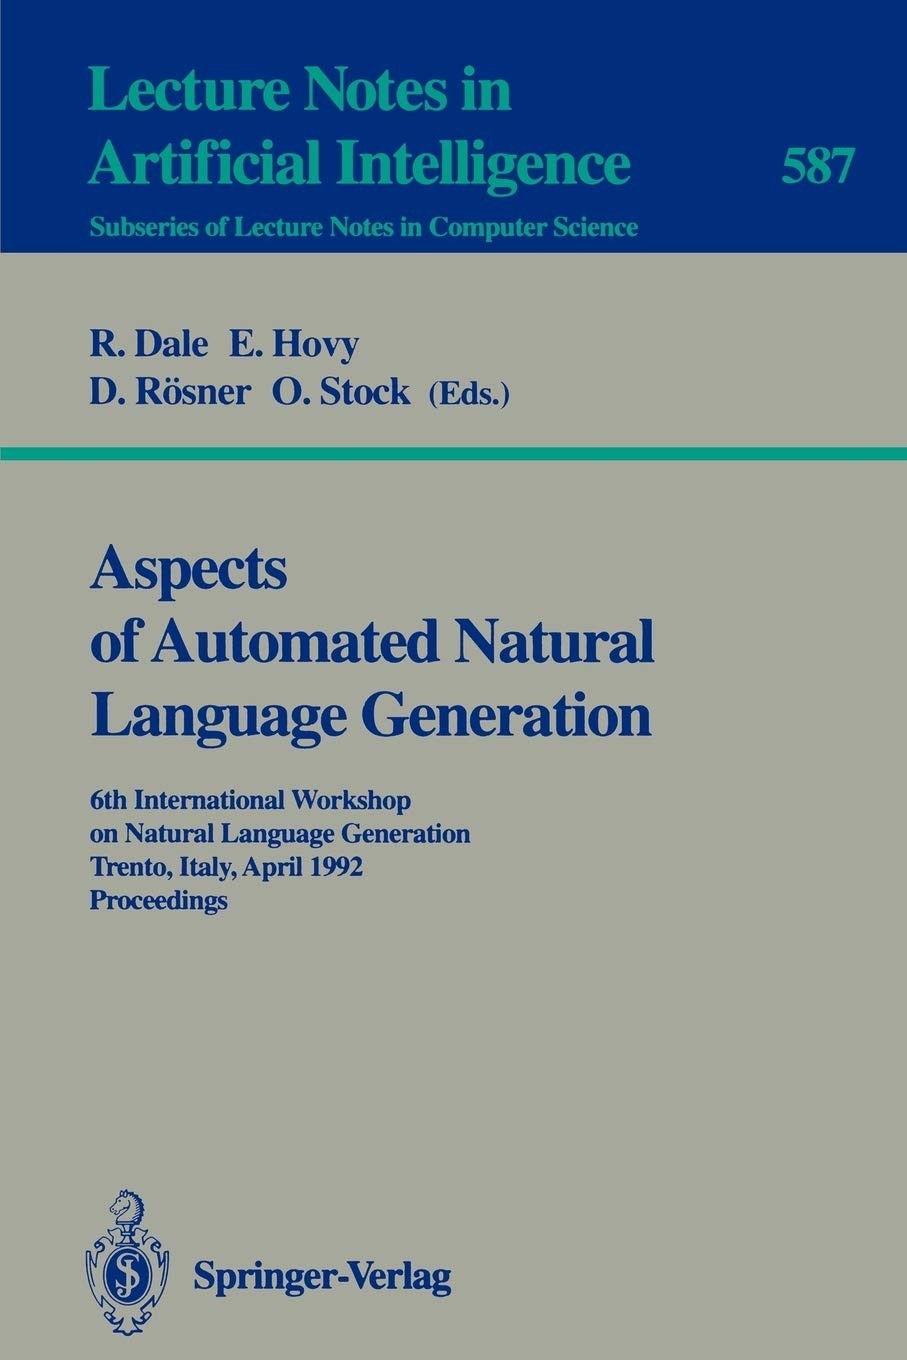 Aspects of Automated Natural Language Generation: 6th International Workshop on Natural Language Generation Trento, Italy, April 5-7, 1992. Proceedings